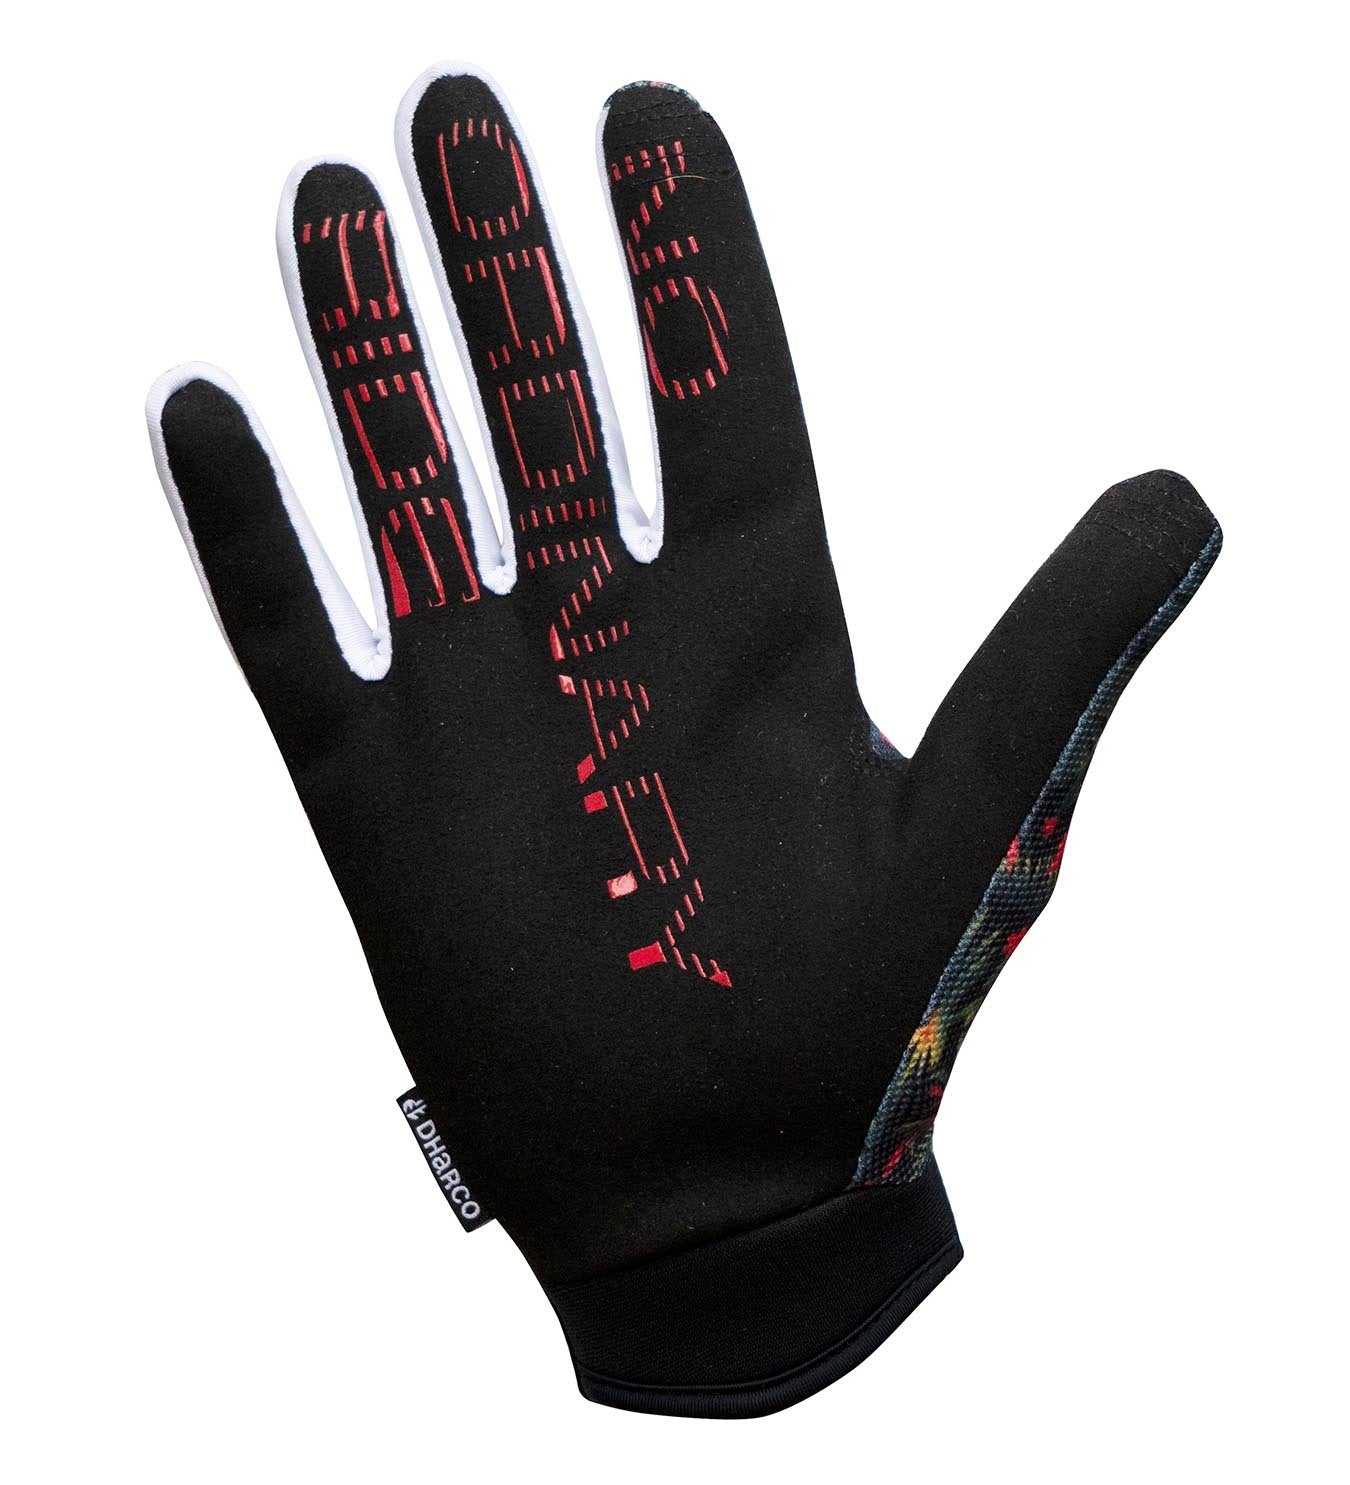 DHaRCO Mens Gloves - Connor